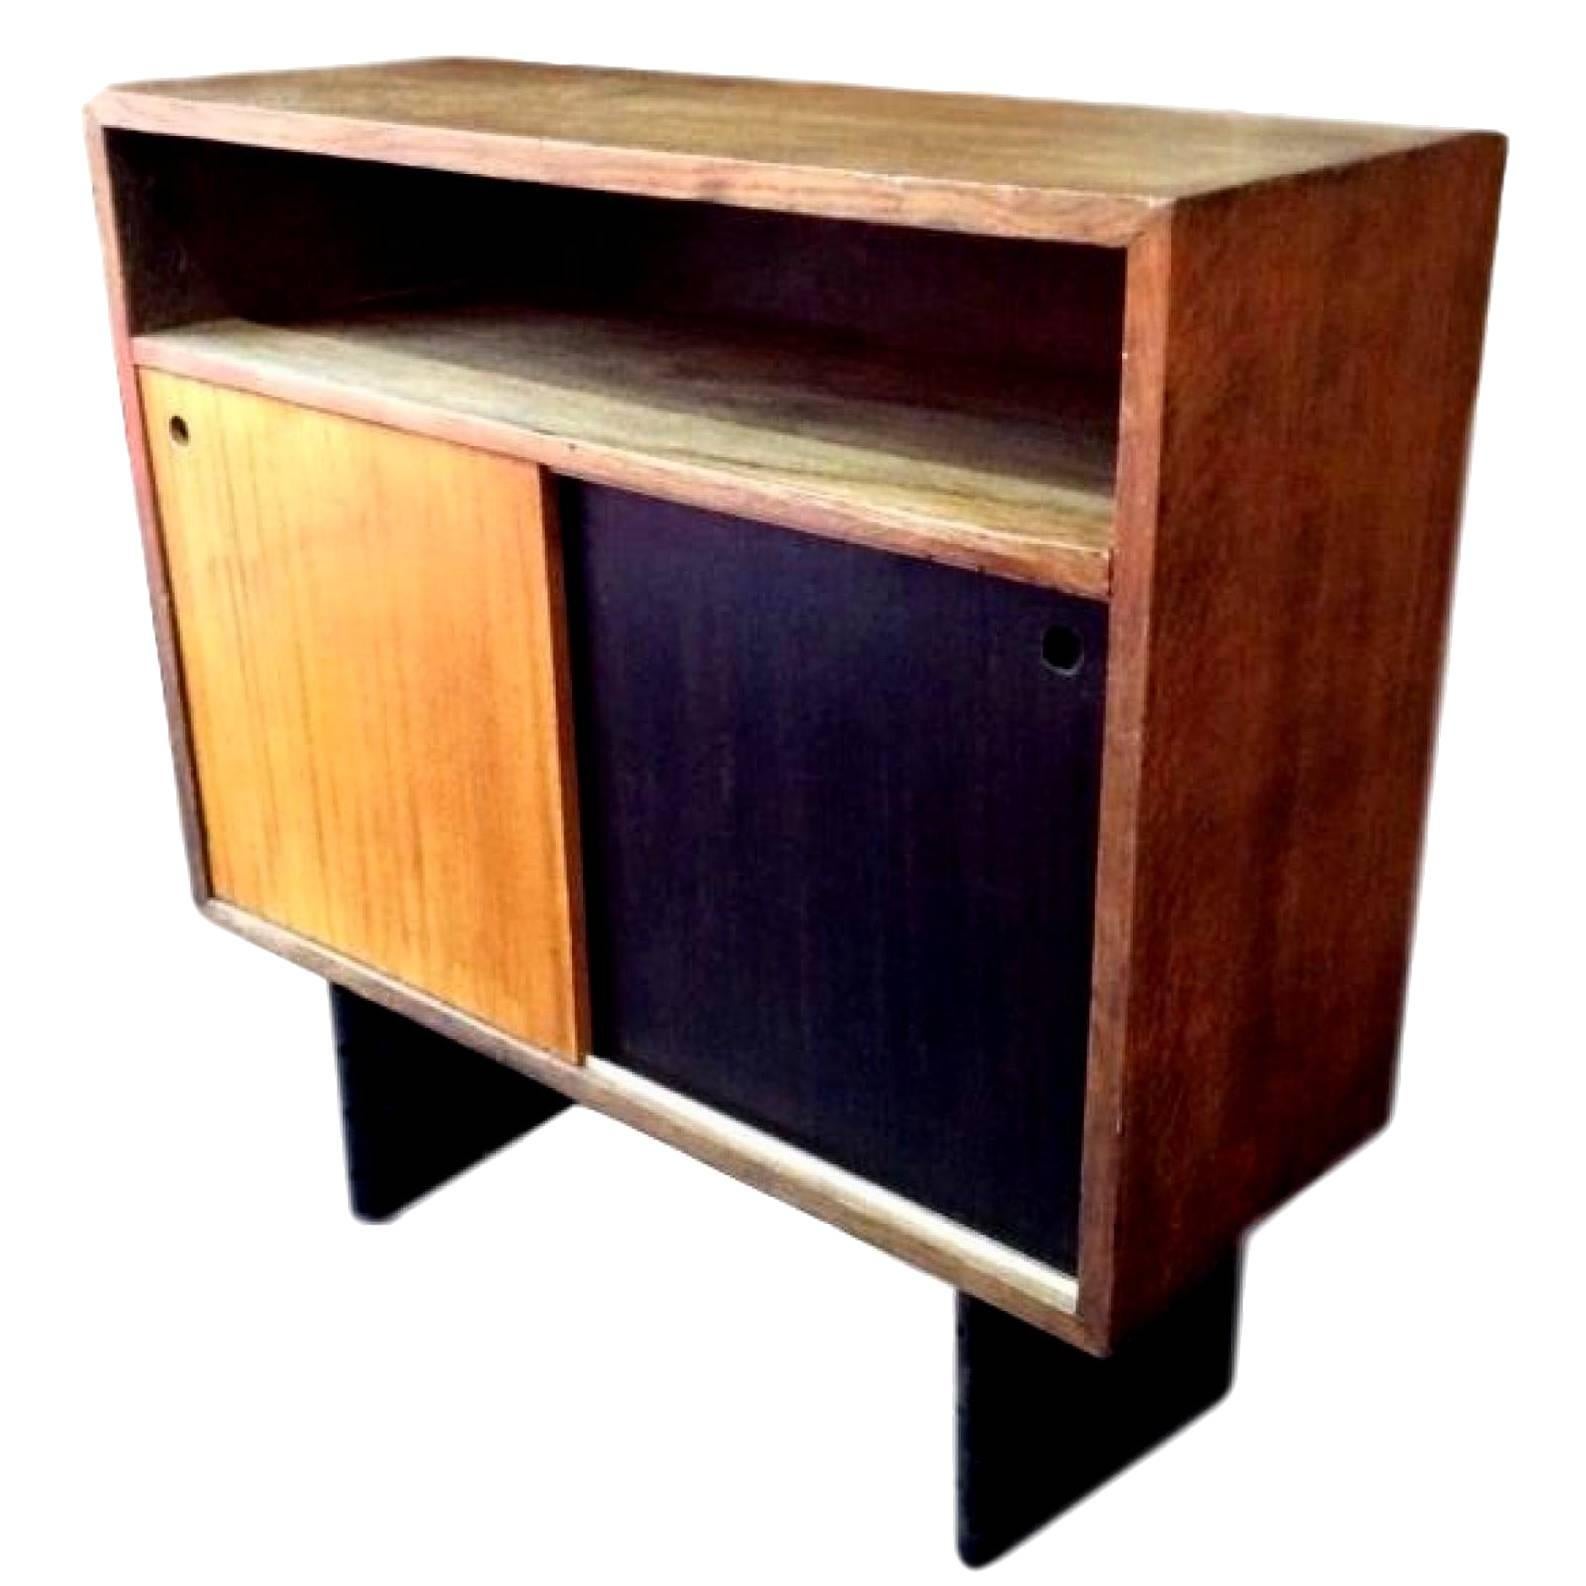 Super rare escande cabinet. Designed for University D' Antony. Escande was a student of Prouve. This design bares a striking resemblance to some of Prouve's best pieces. Hardly ever available for sale. Oak frame with sliding doors and inset cubby